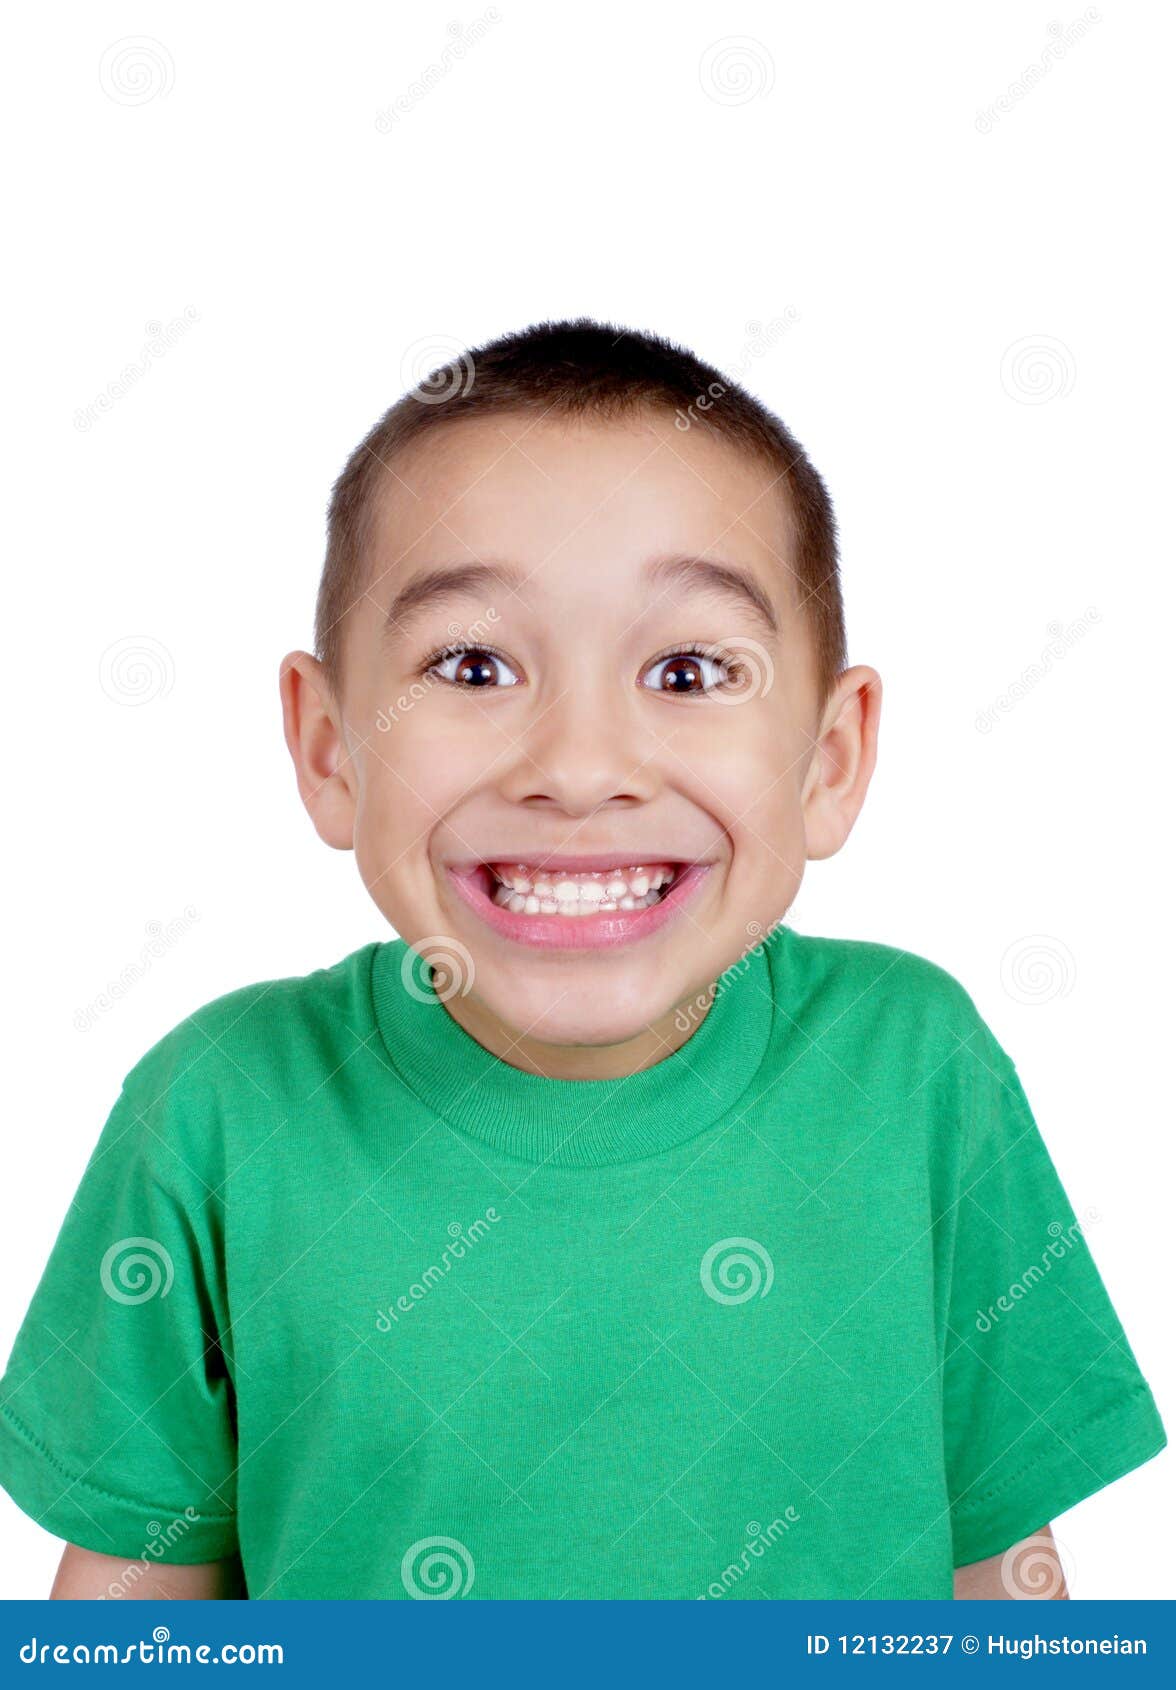 Six-year-old boy making a silly face, with a big toothy smile ...